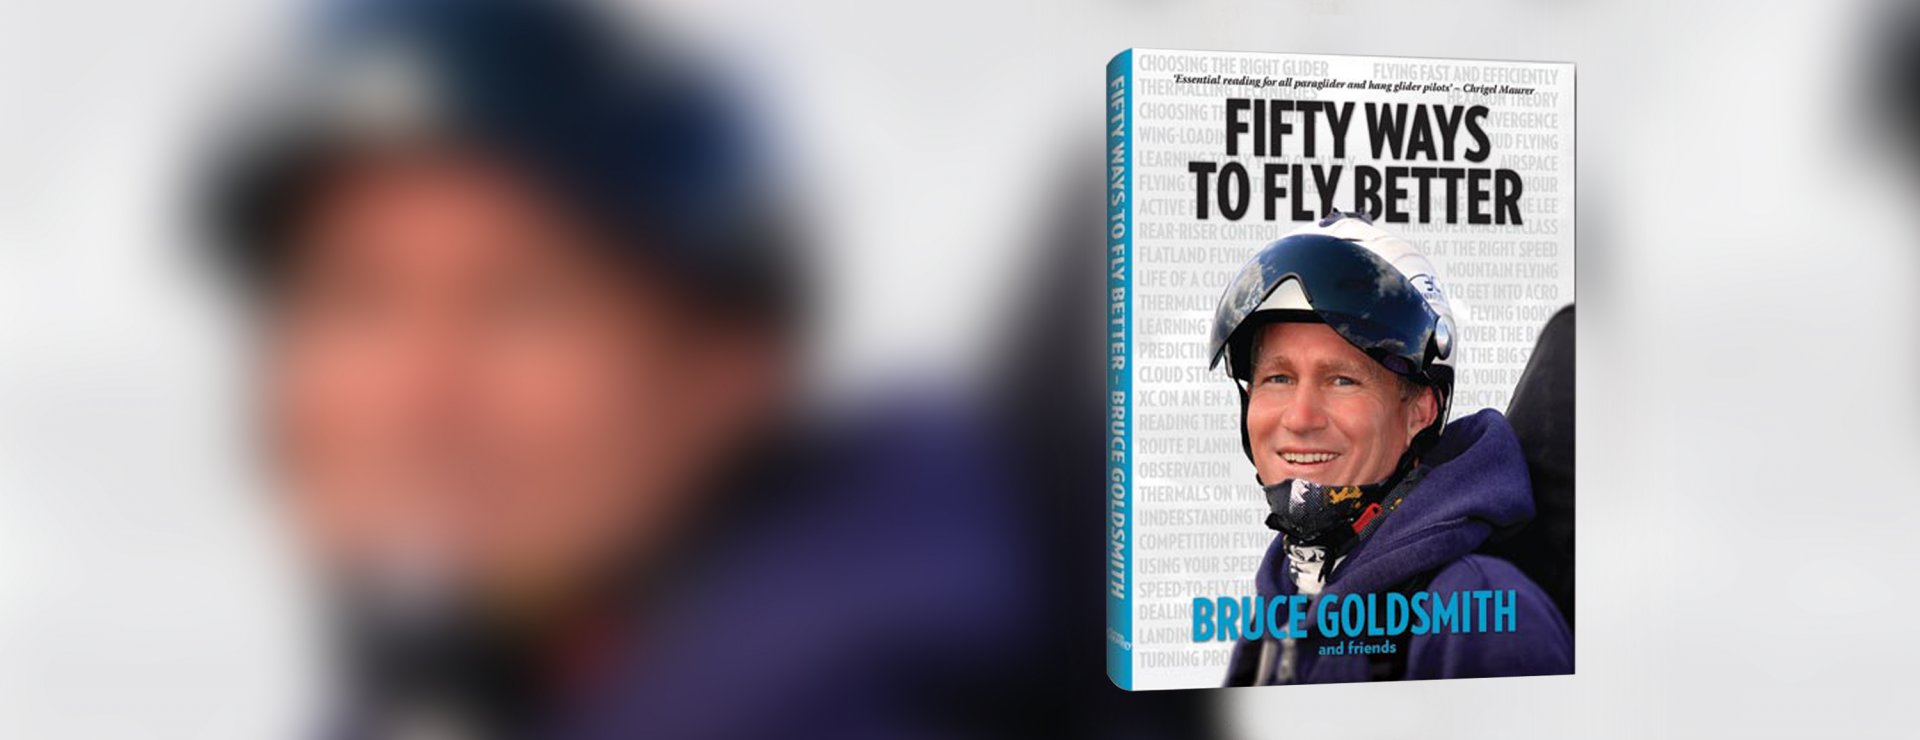 Cross Country publish 50 Ways to Fly Better by Bruce Goldsmith and friends.